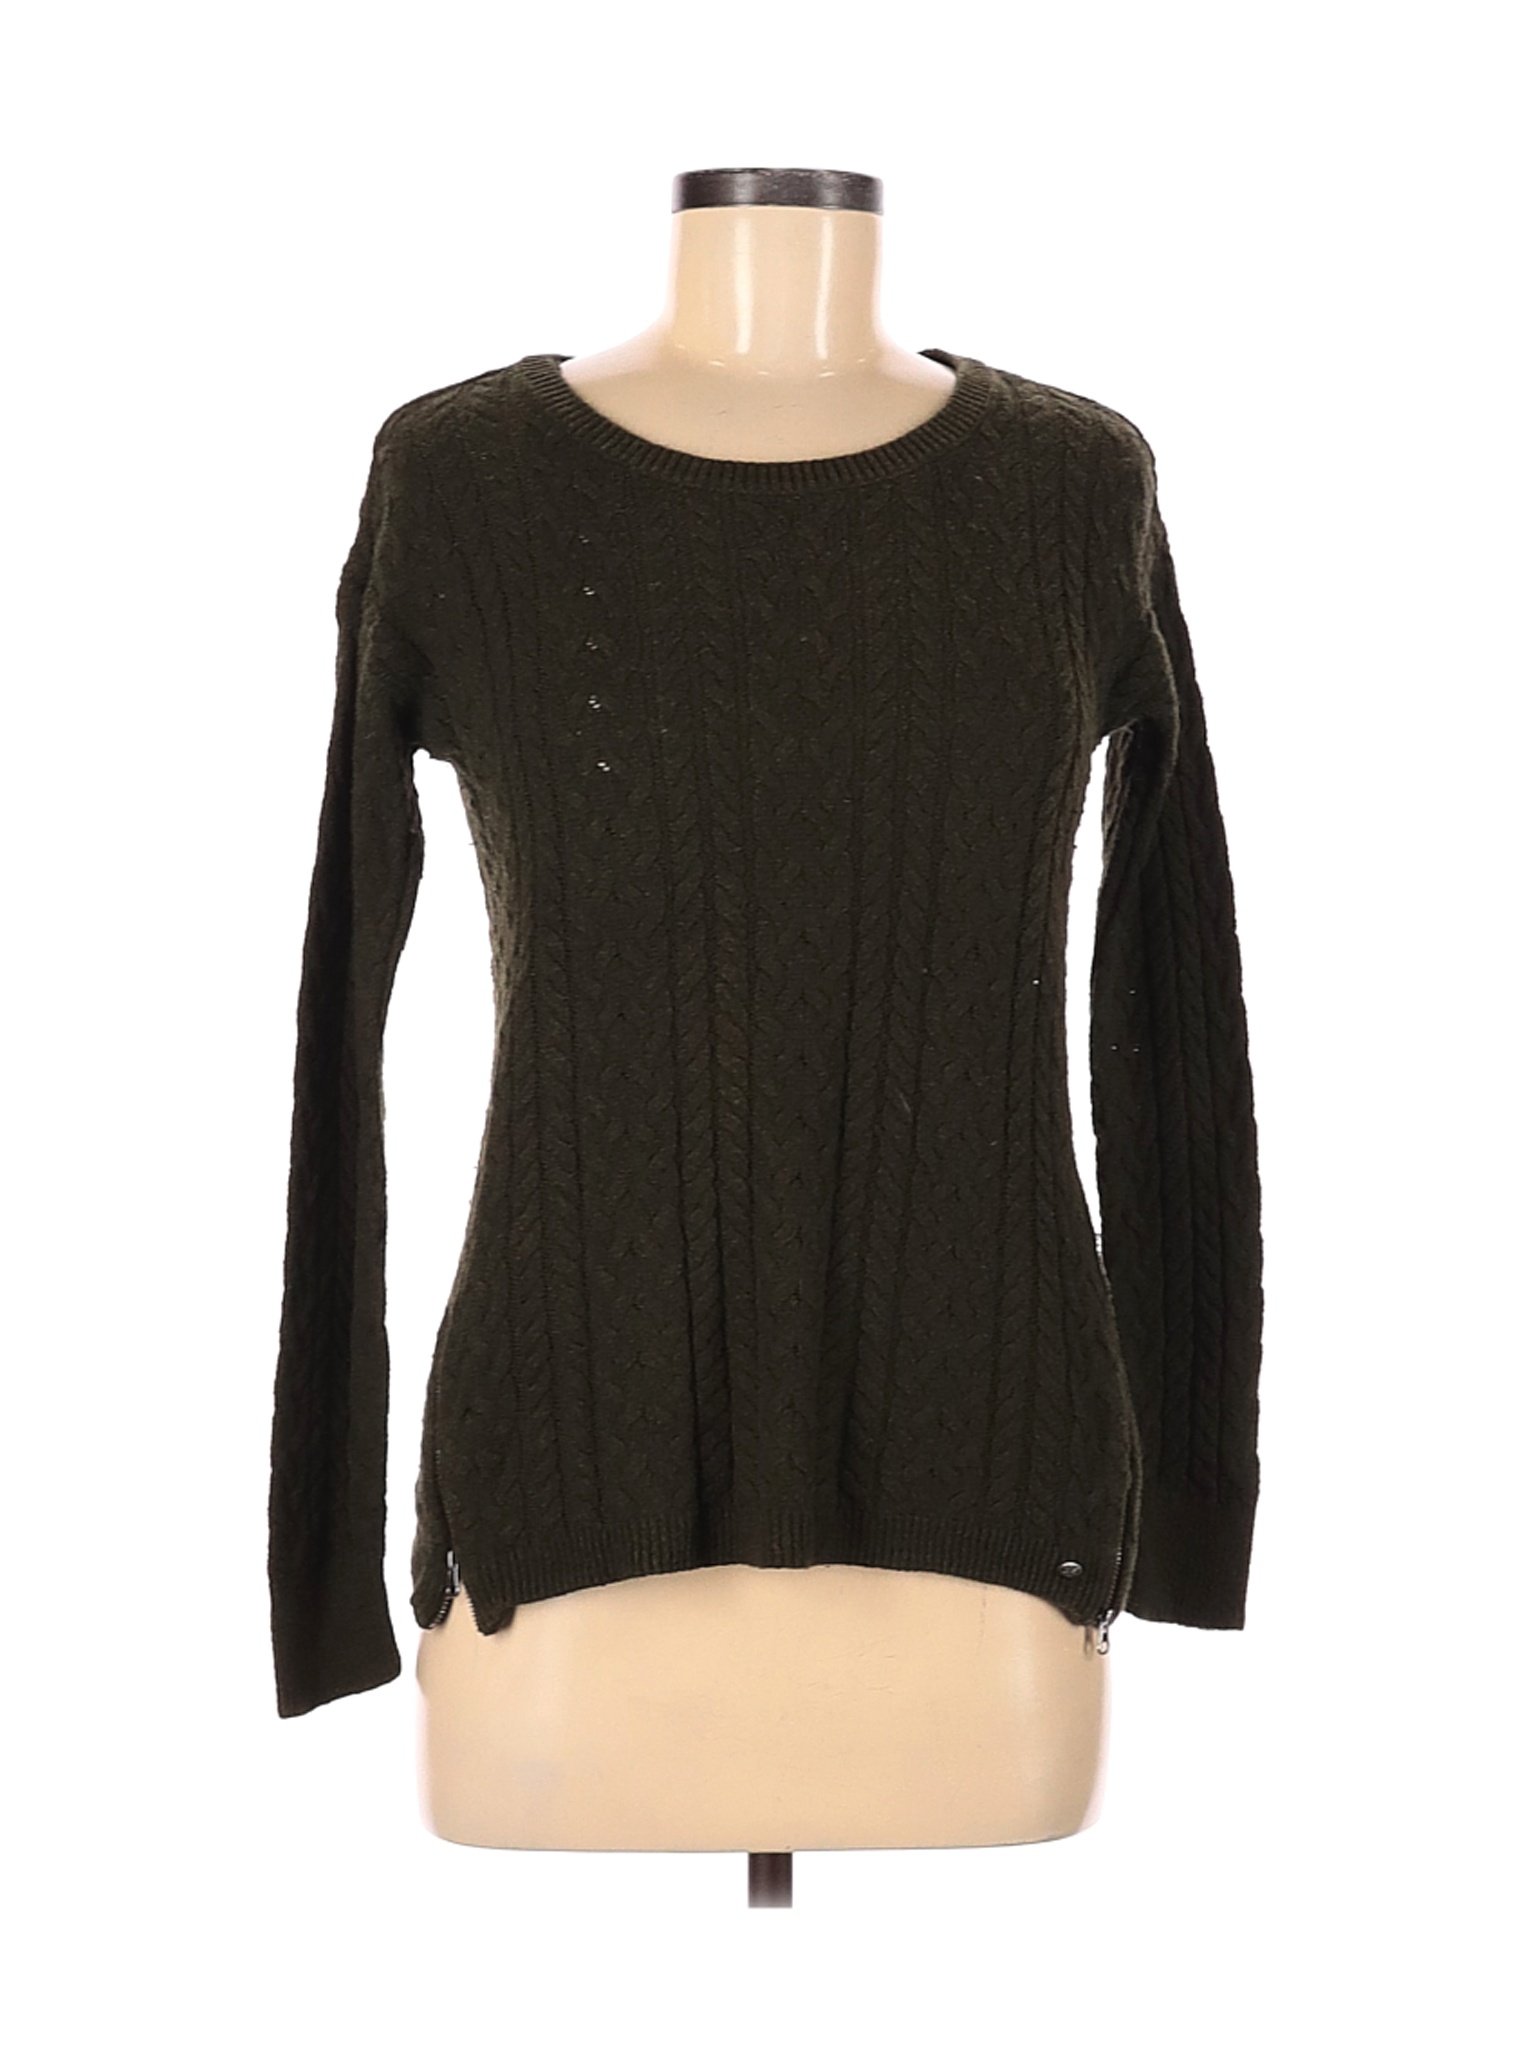 American Eagle Outfitters Women Black Pullover Sweater M | eBay